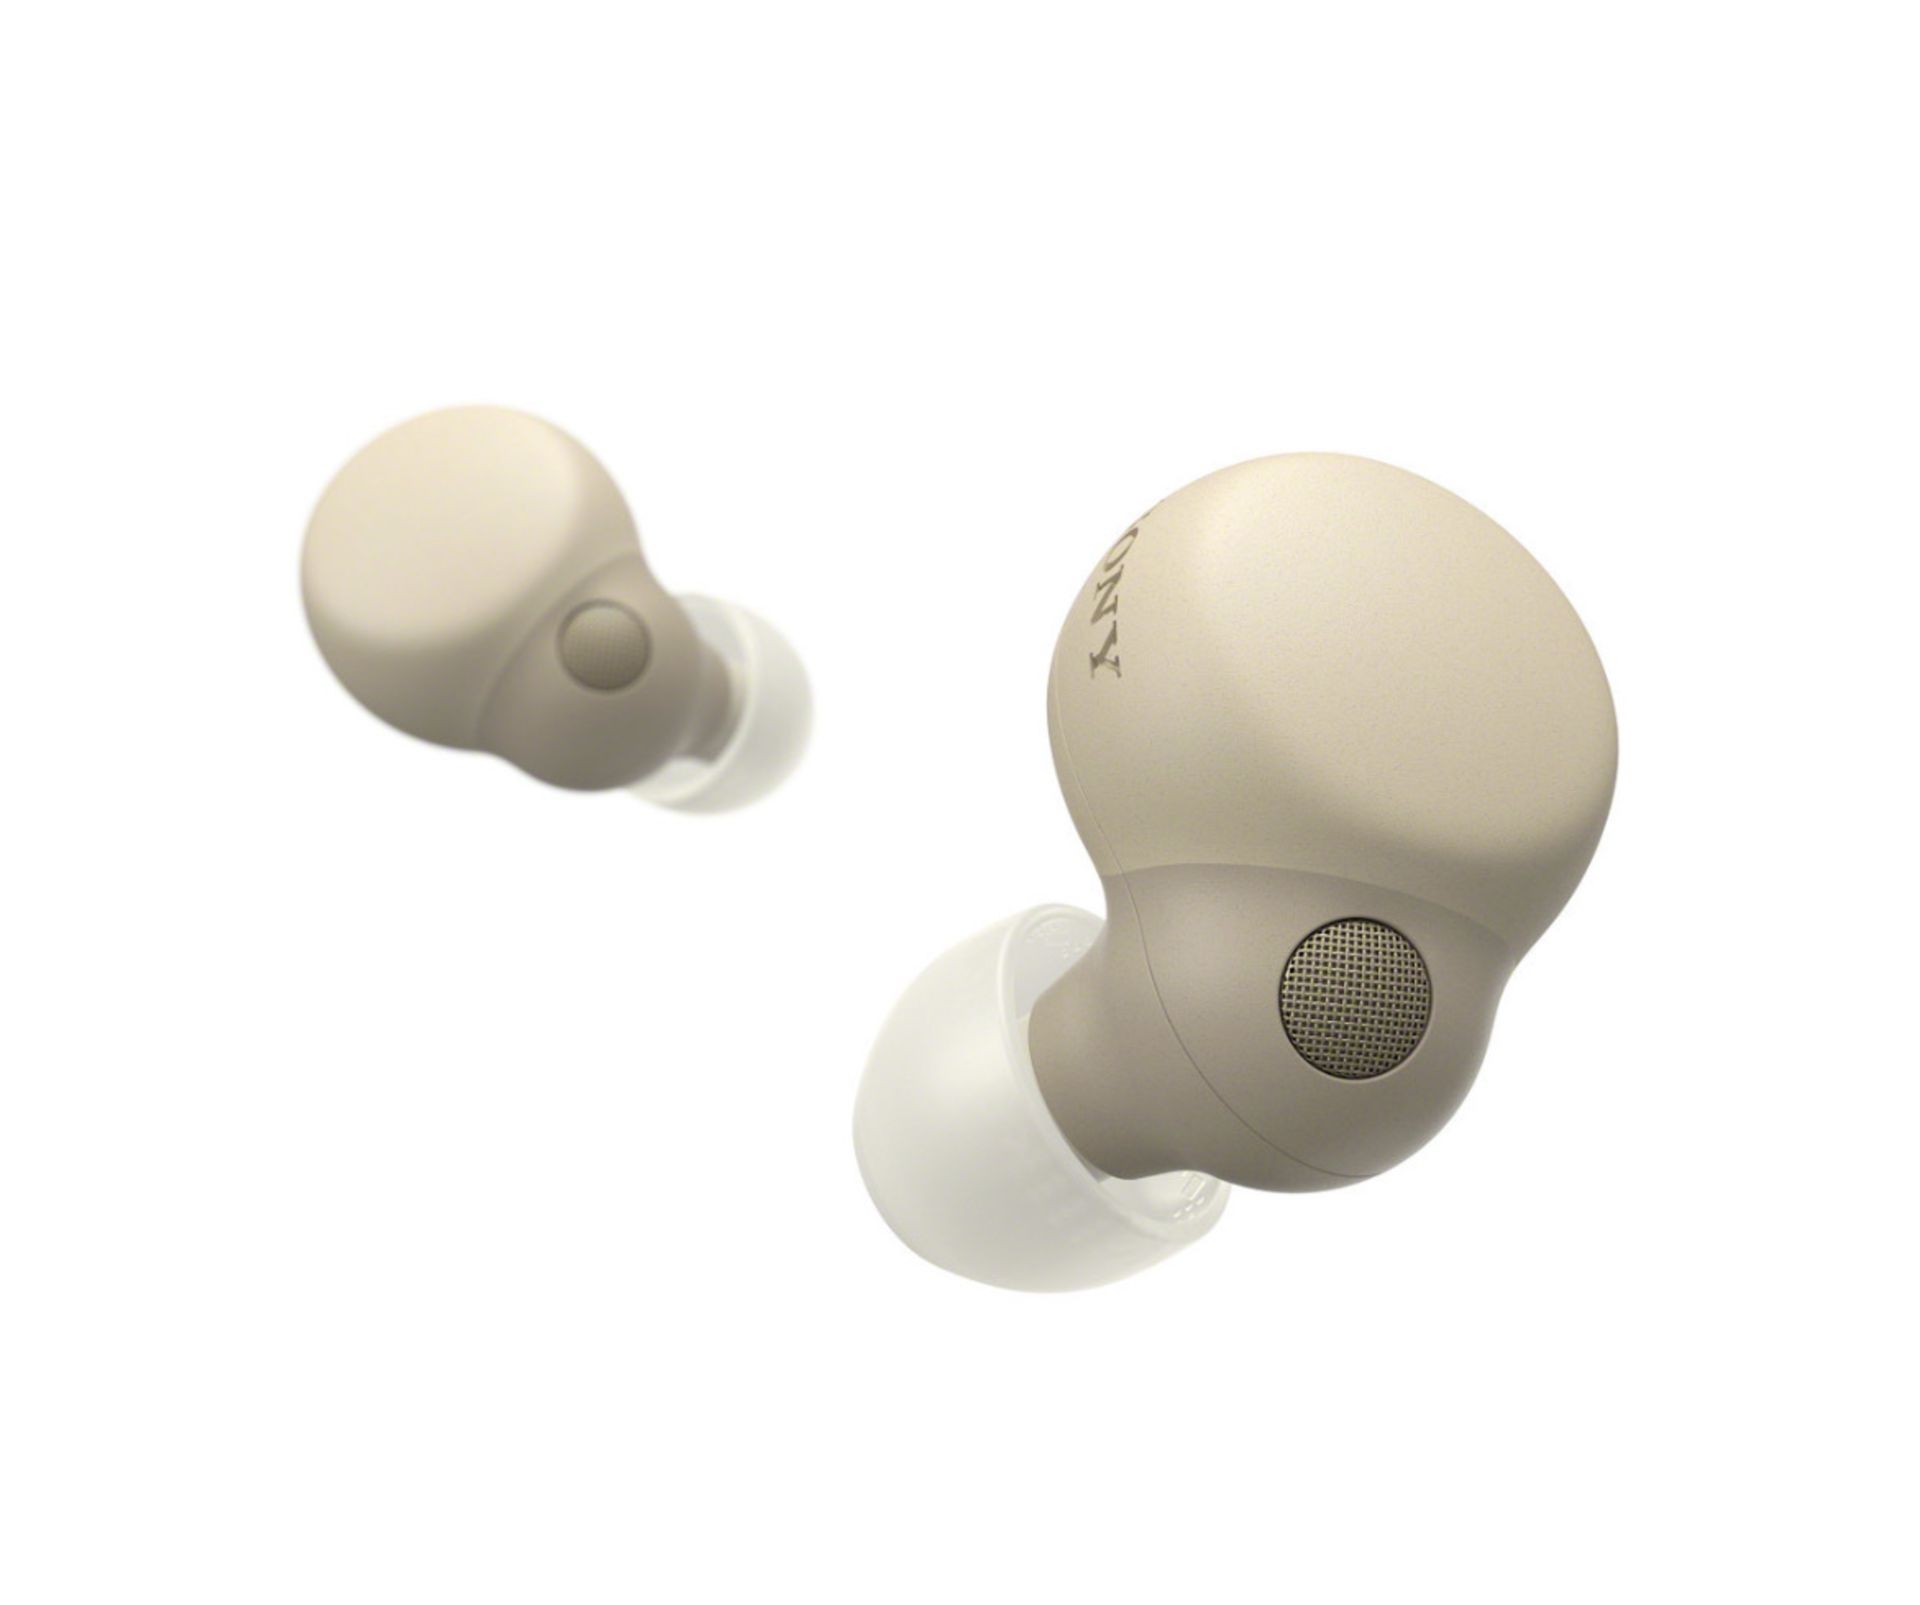 SONY LINKBUDS S WIRELESS NOISE-CANCELLING, WATER RESISTANT HEADPHONES IN BEIGE - RRP £149